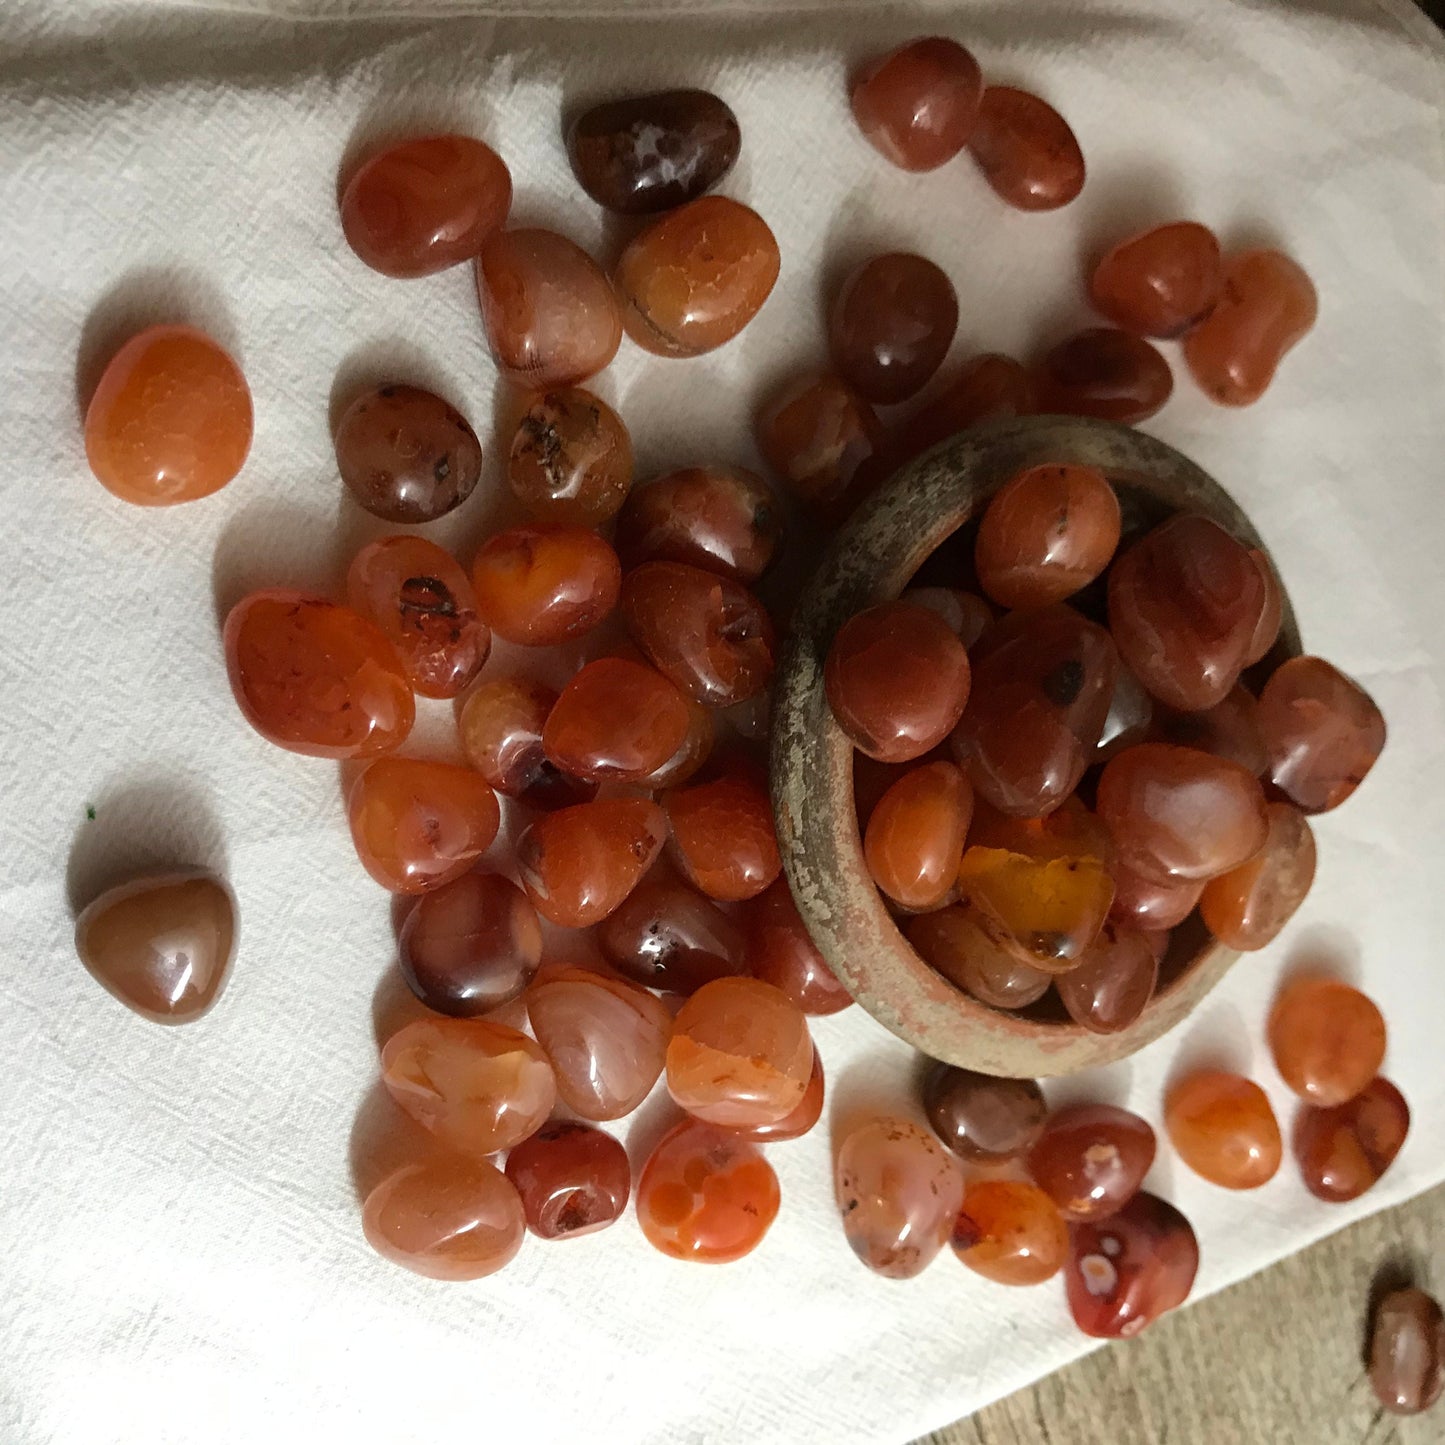 Carnelian Agate Tumbled Polished (Approx. 5/8" - 3/4") Polished Stone for Crystal Grid, Wire Wrapping or Craft Supply BIN-1333